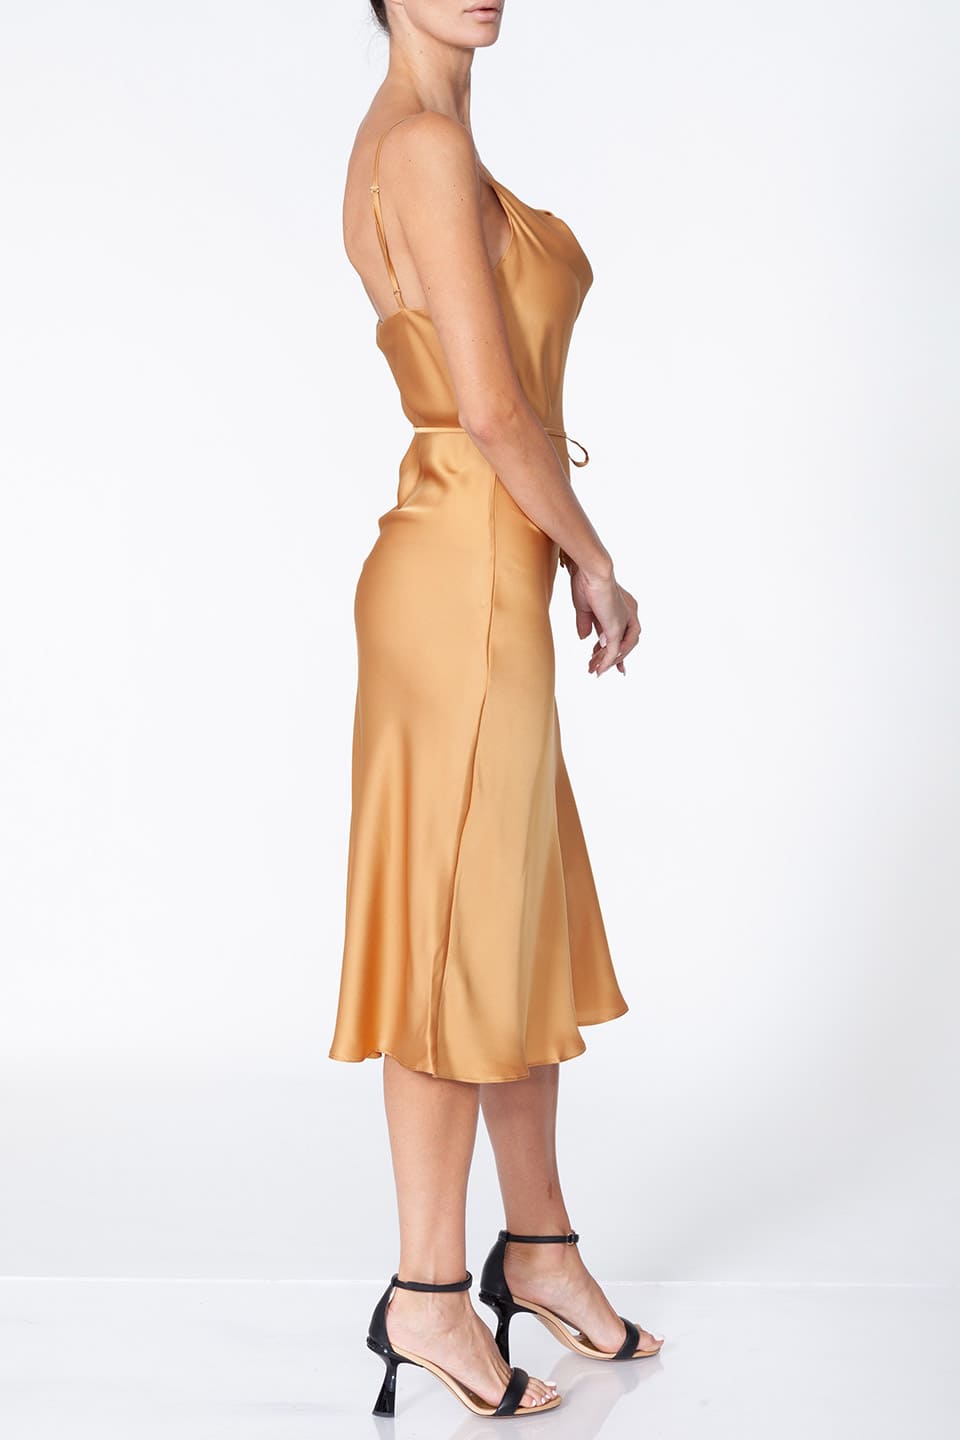 Fashion Stylist Anze's gold midi dress full-body left side view with model in pose